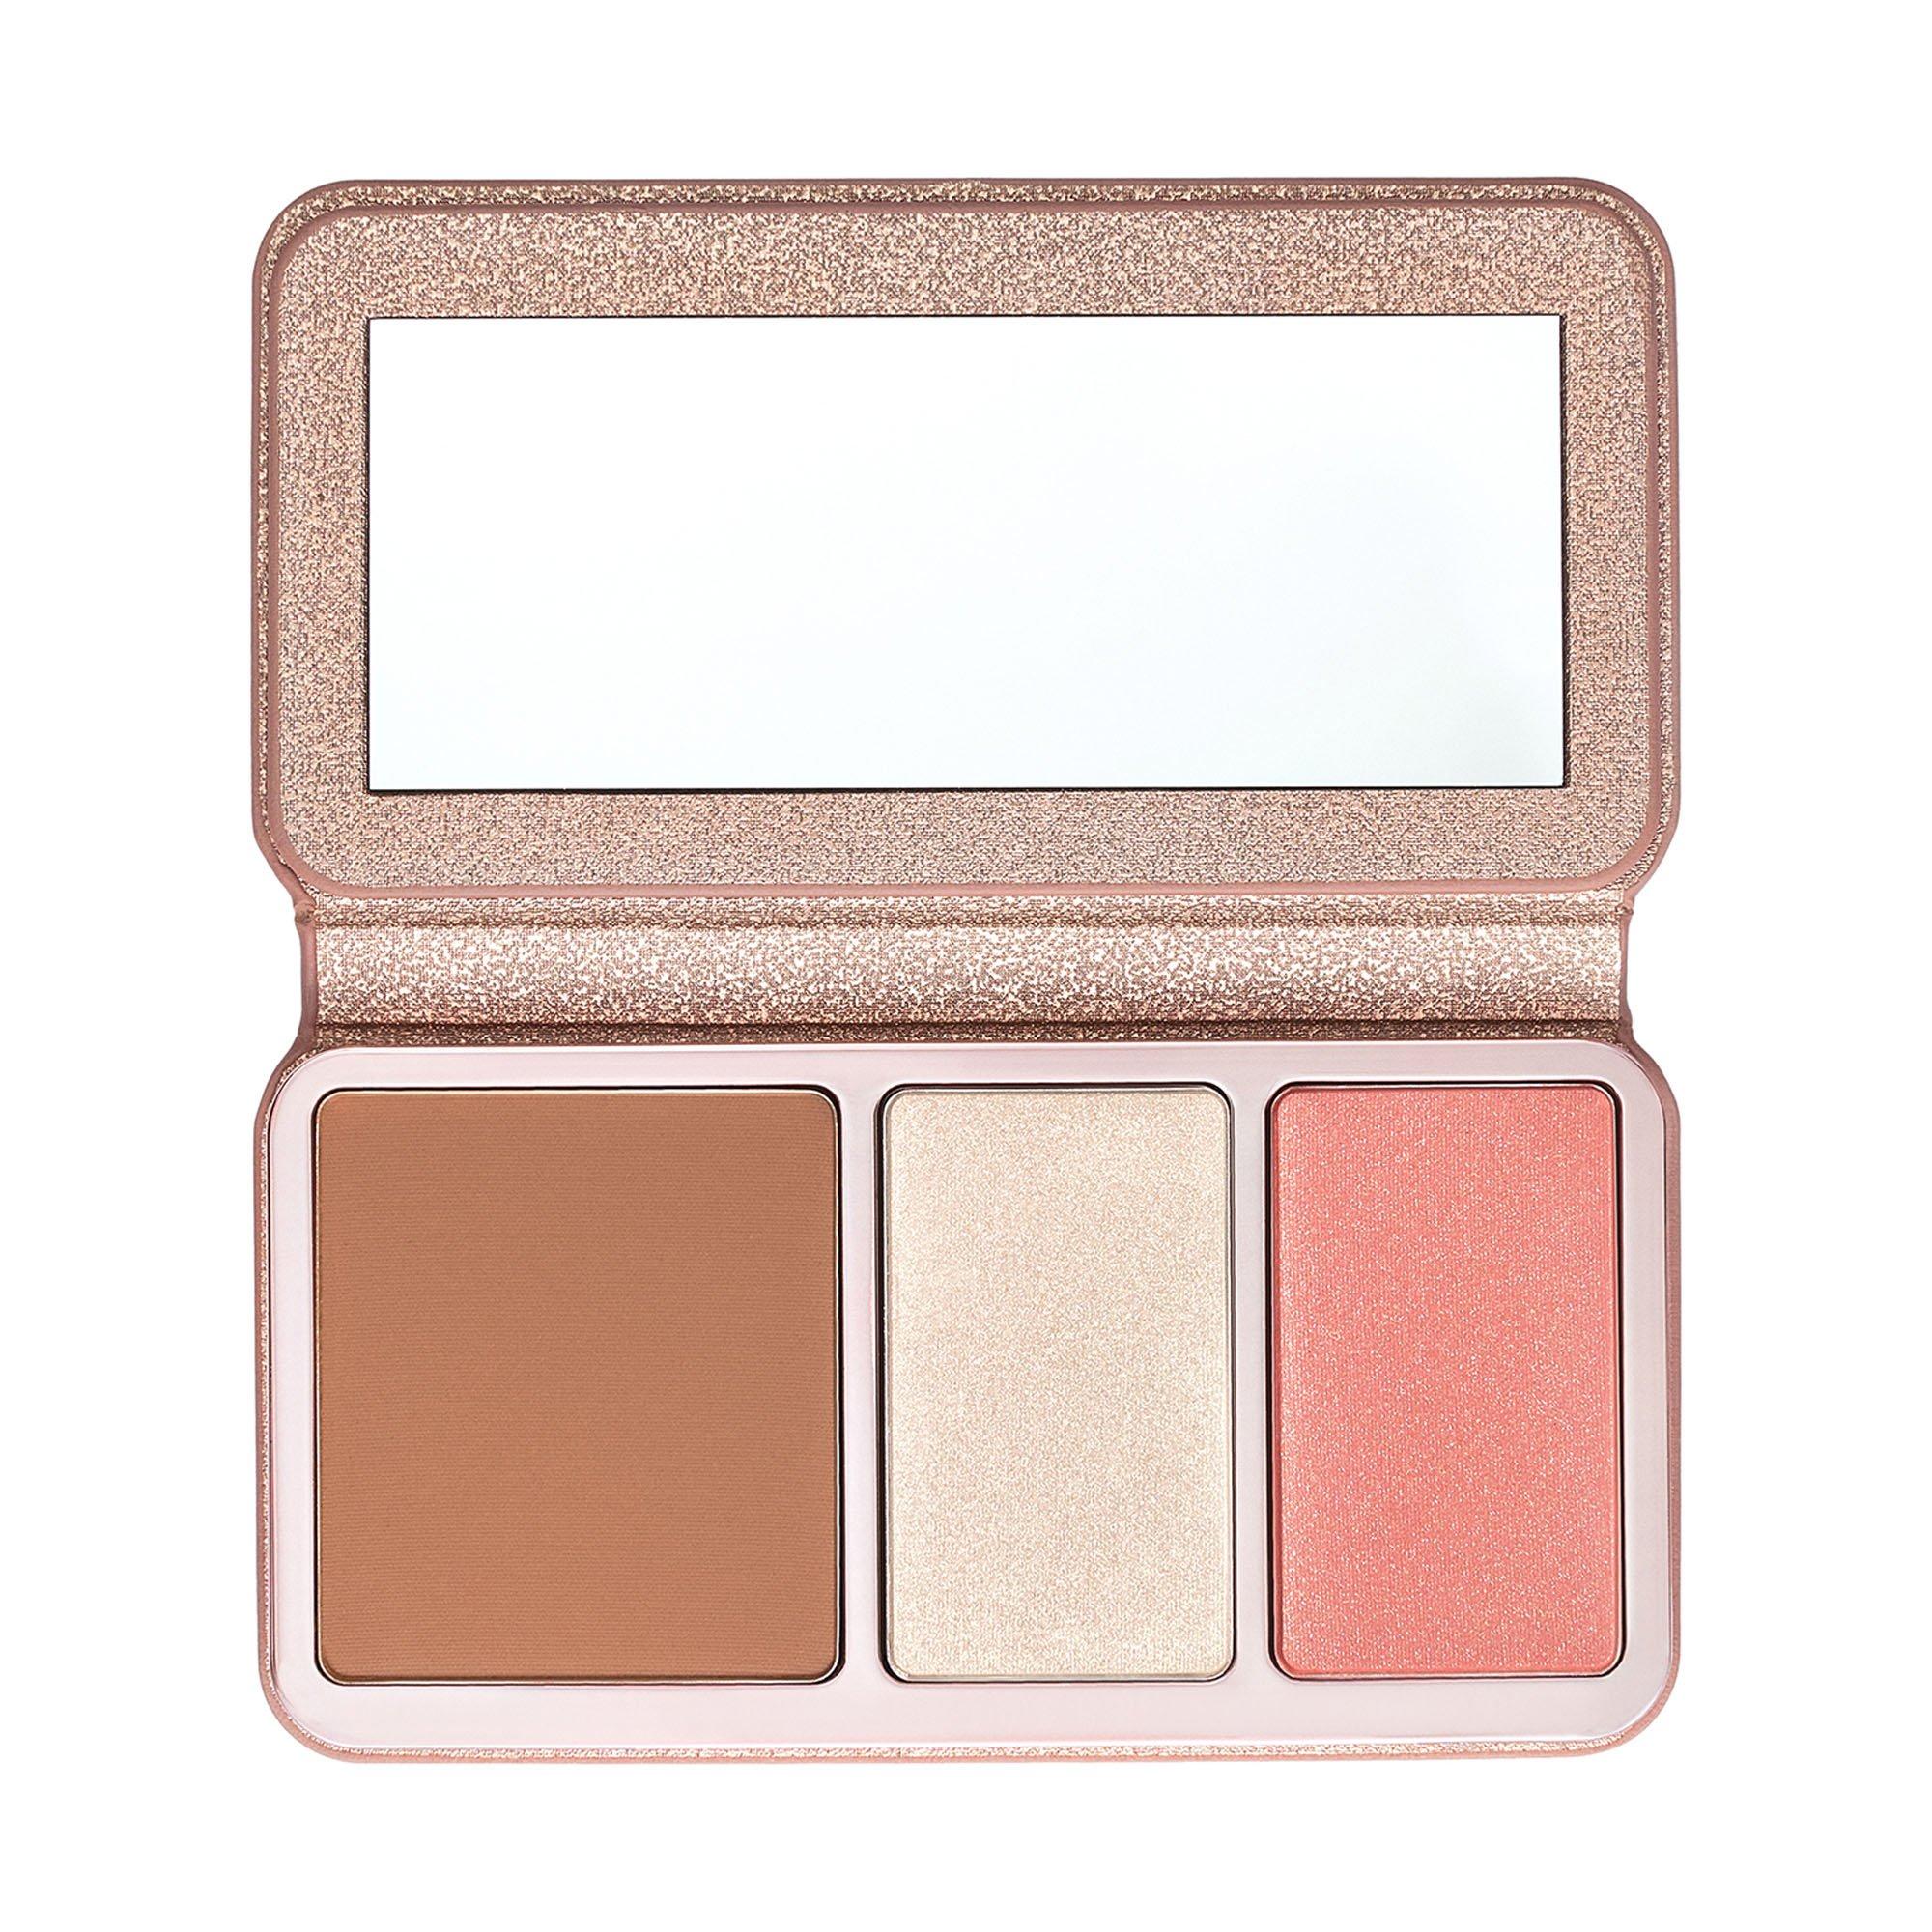 Image of Anastasia Beverly Hills Face Palette